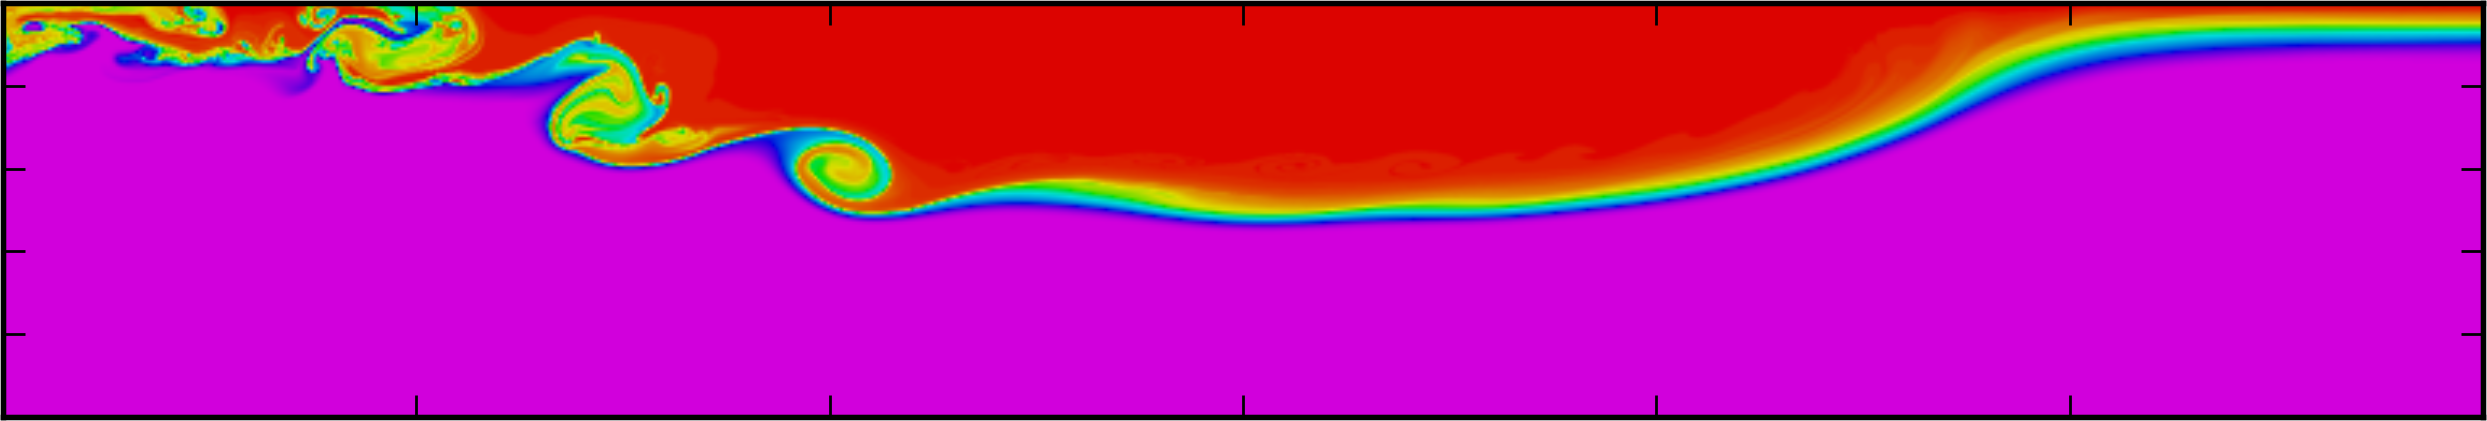 Numerical simulation of a breaking ISW